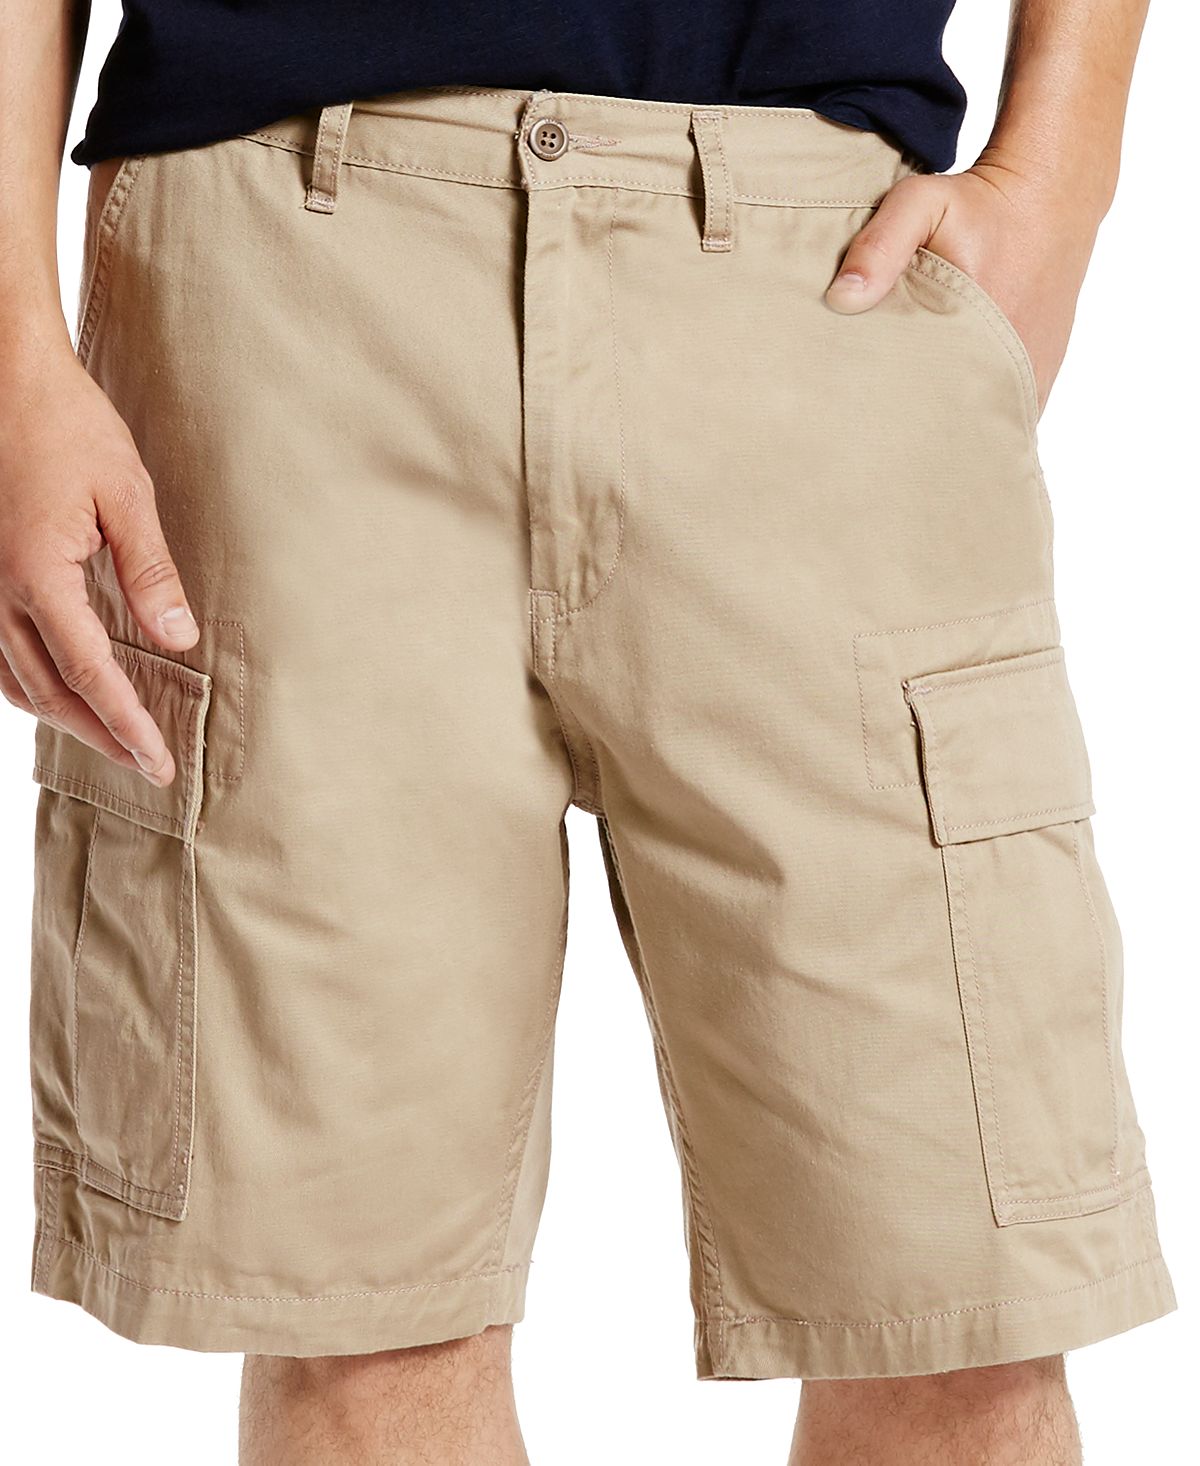 Levi's Carrier Loose-fit Cargo Shorts True Chino - Waterless